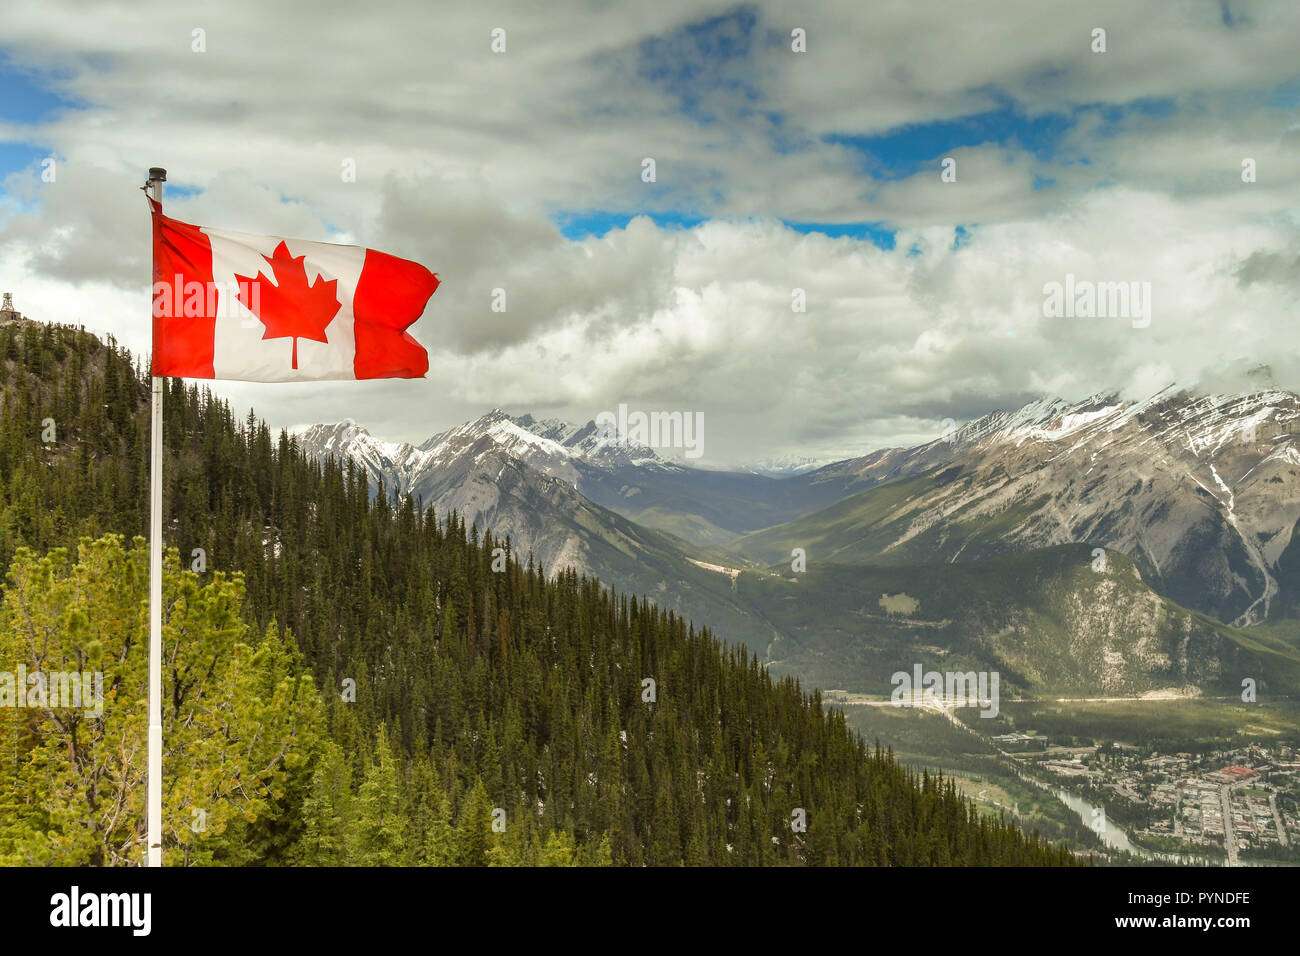 BANFF, AB, CANADA - JUNE 2018: National flag of Canada, the Maple Leaf, flying on the lookout point on the top of Sulphur Mountain in Banff. Stock Photo